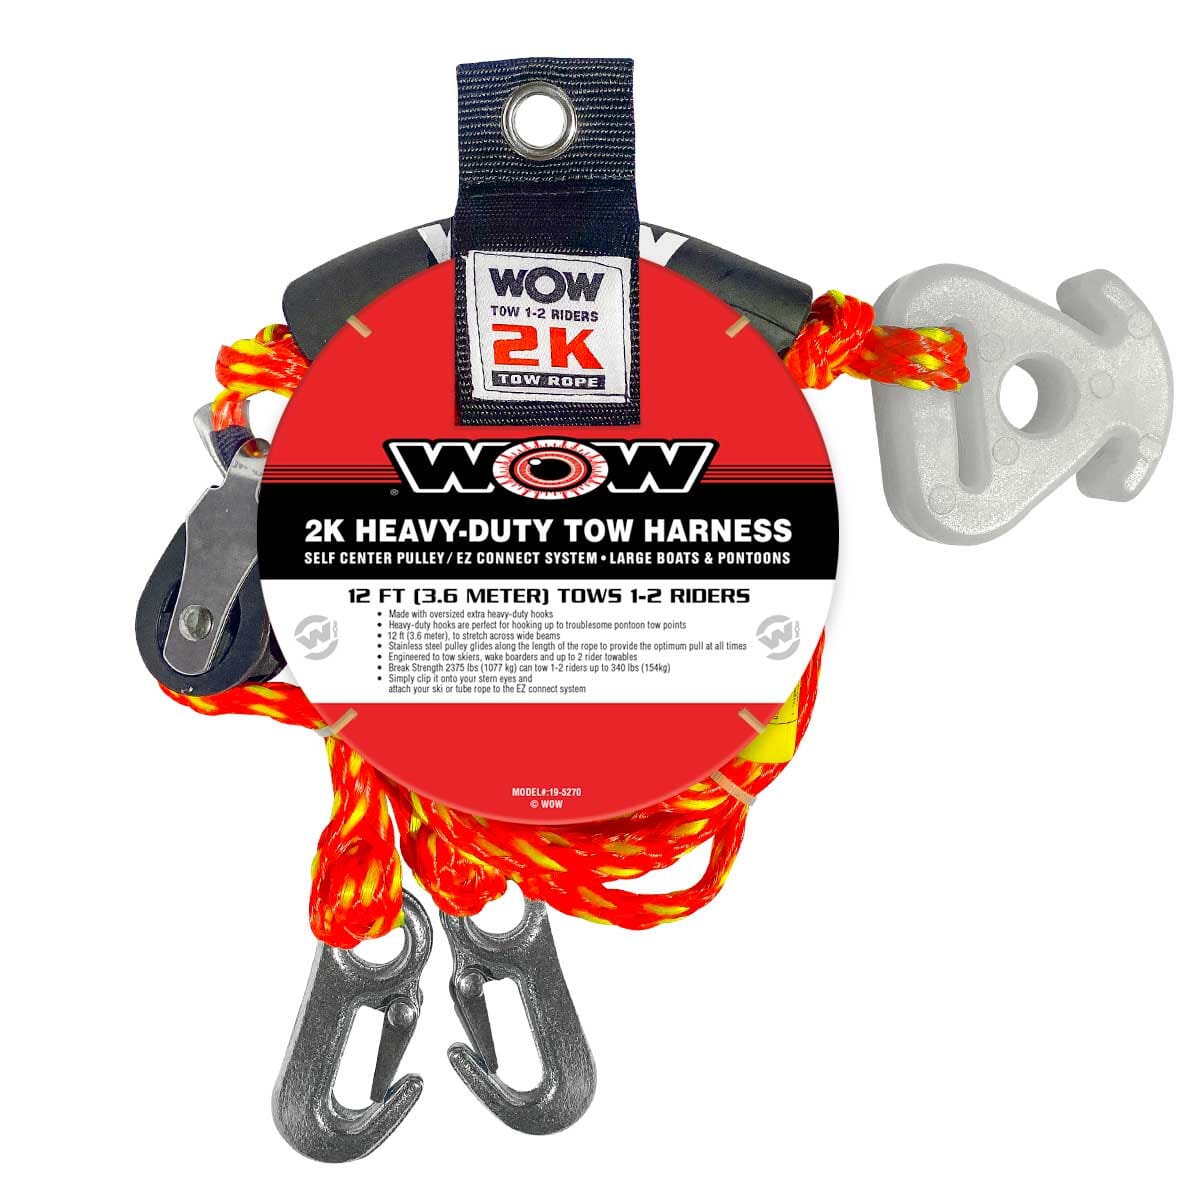 16 ft. Heavy-Duty Tow Harness for Boats